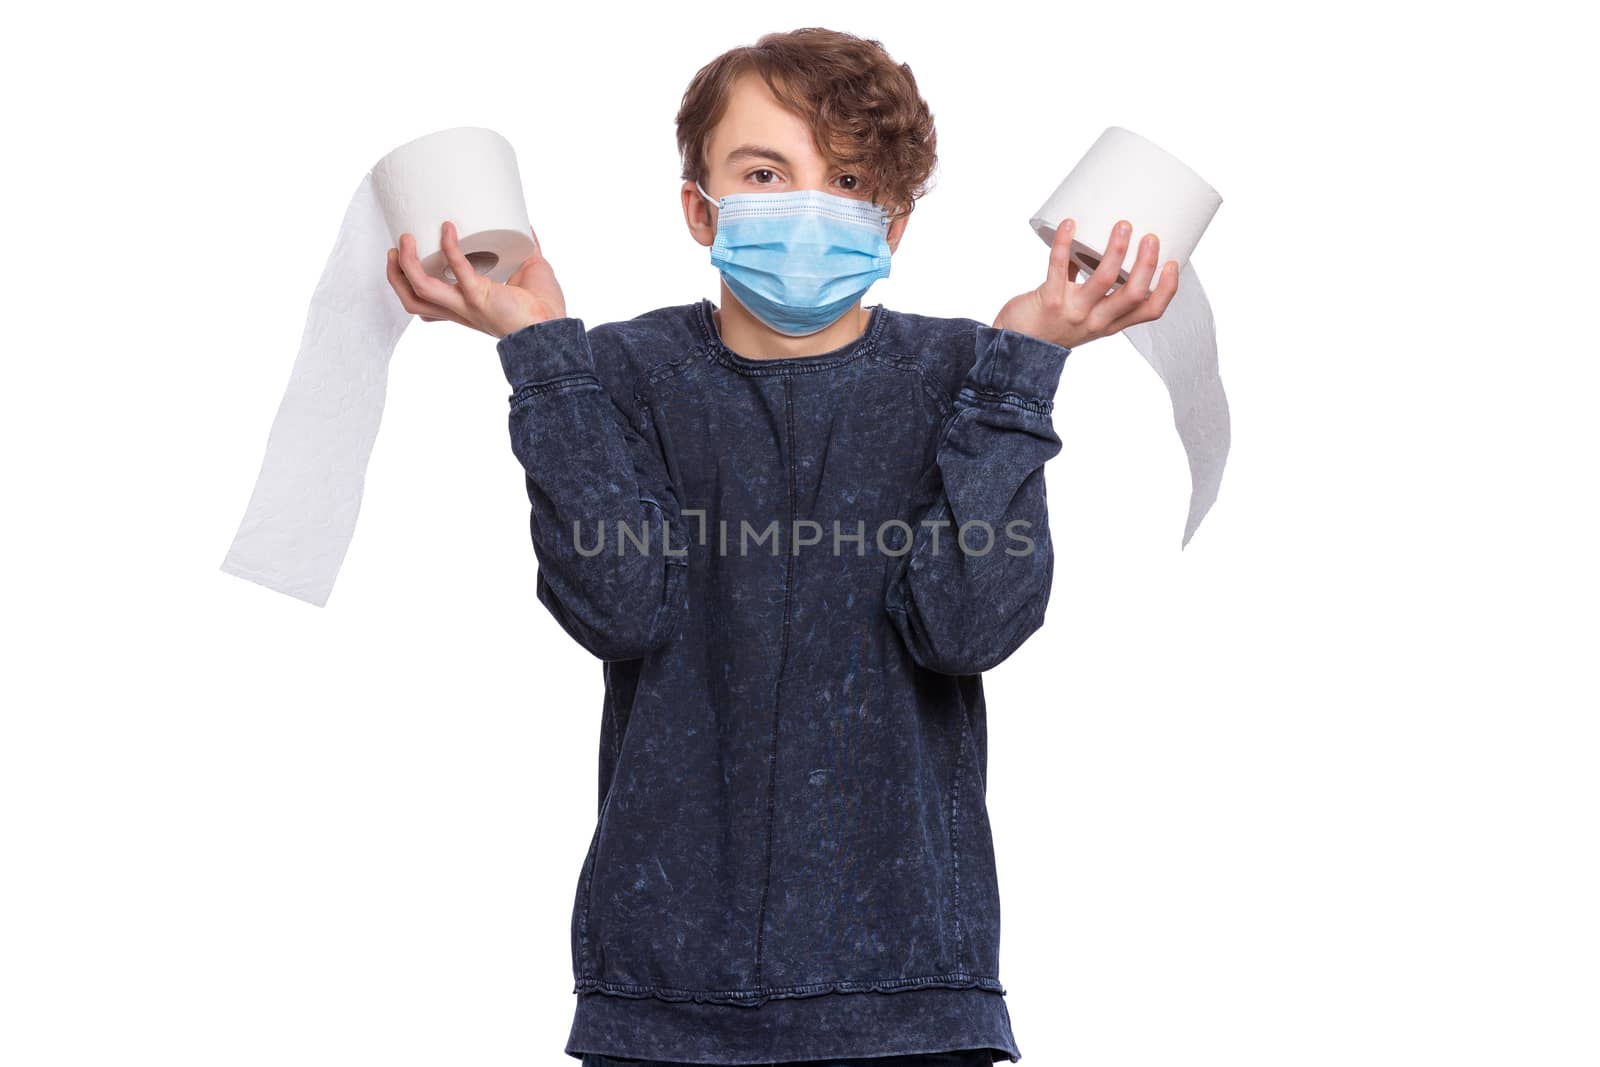 Concept of coronavirus quarantine. COVID-19 - home isolation. Teen boy wearing medical protective face mask to health protection from influenza virus, isolated on white. Child holds toilet paper.